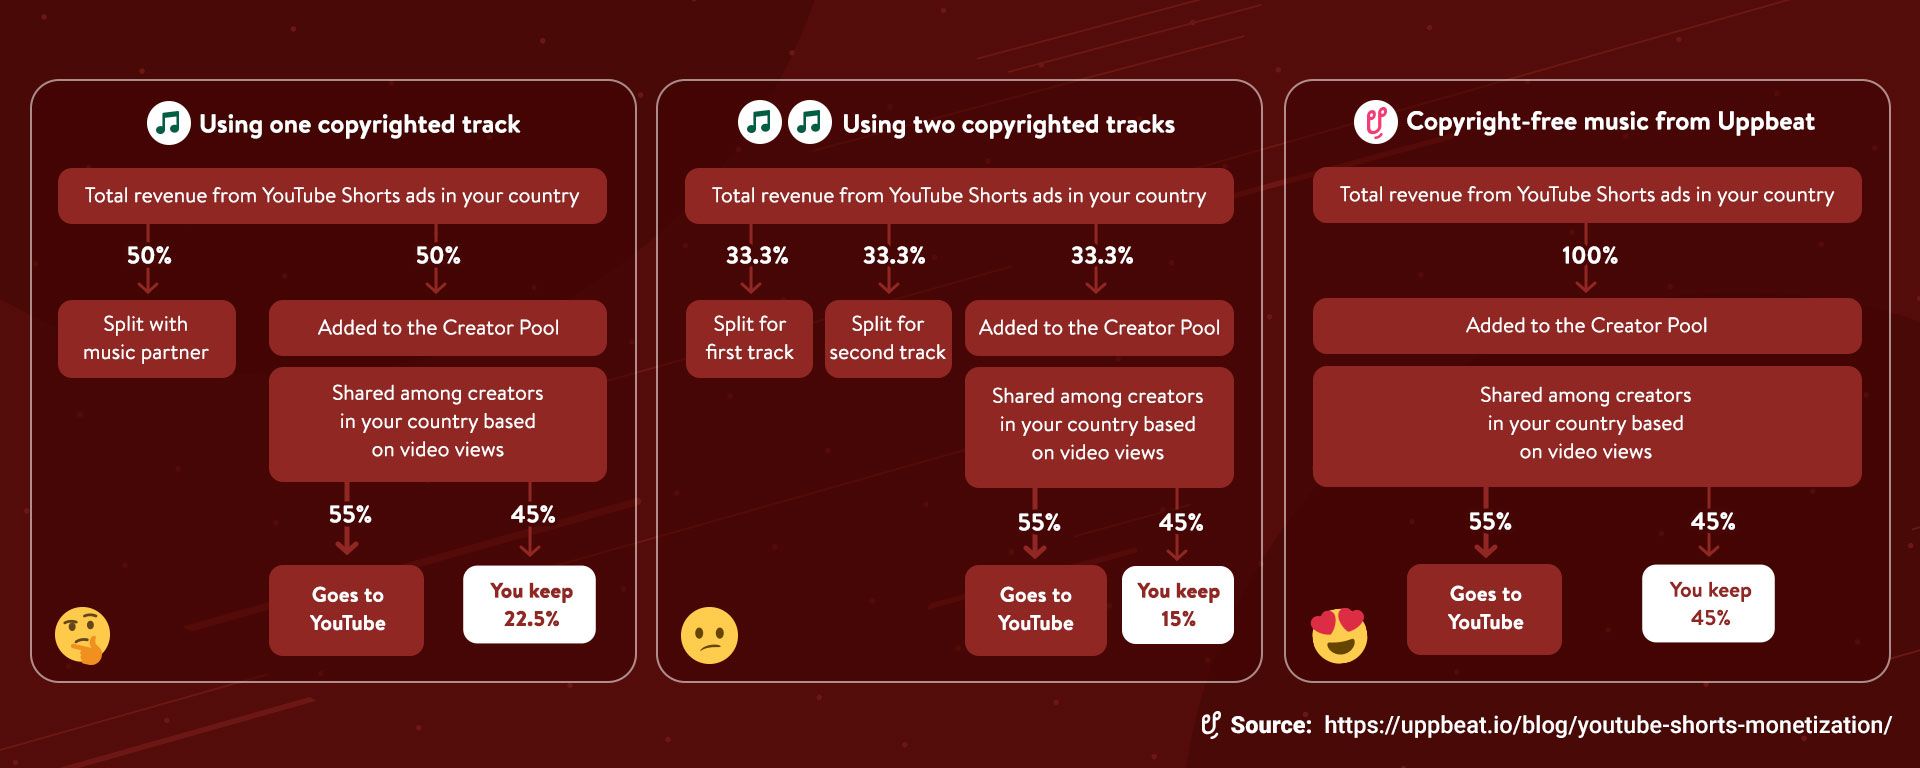 Diagram showing the share of ad revenue YouTube Shorts creators can expect to receive depending on the number of copyrighted music tracks they use in their videos.